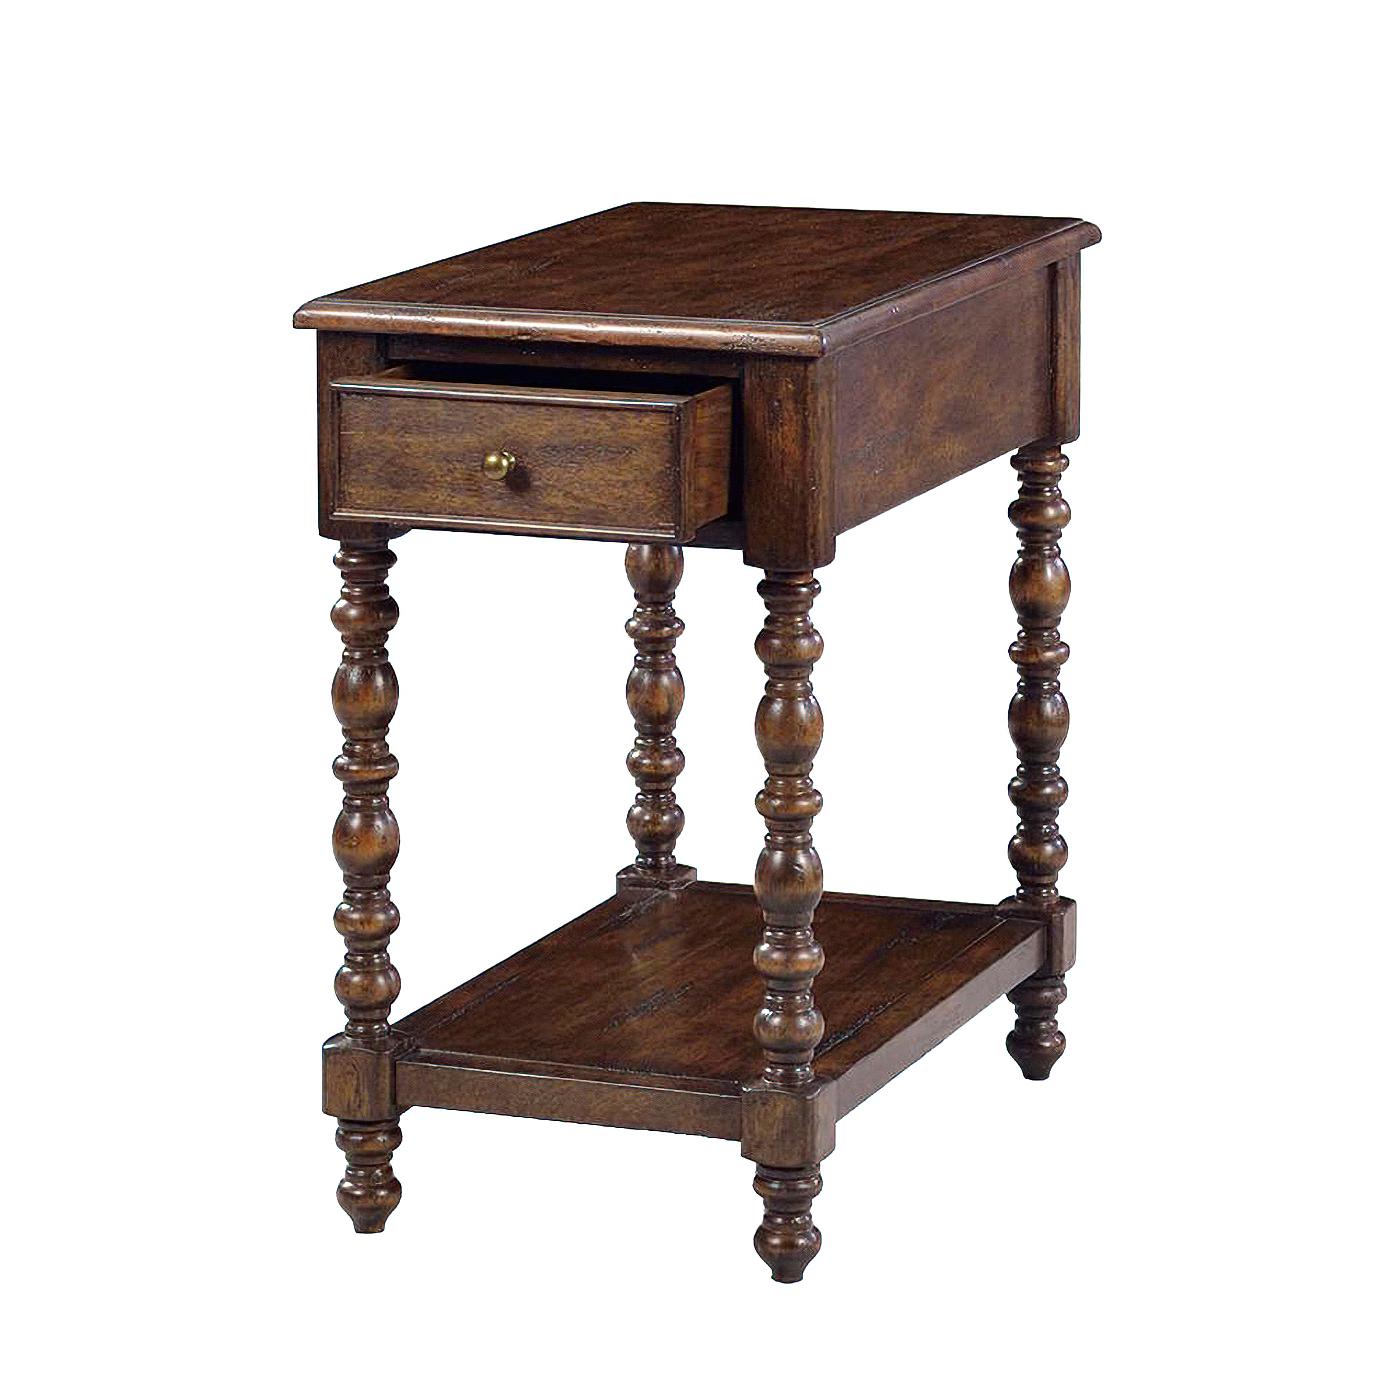 A Jacobean style rectangular one-drawer side table with an ogee top edge, in our distressed rustic country wood tone with natural highlights, with a hand-rubbed satin finish with a brass pull and lower shelf stretcher.

Dimensions: 14